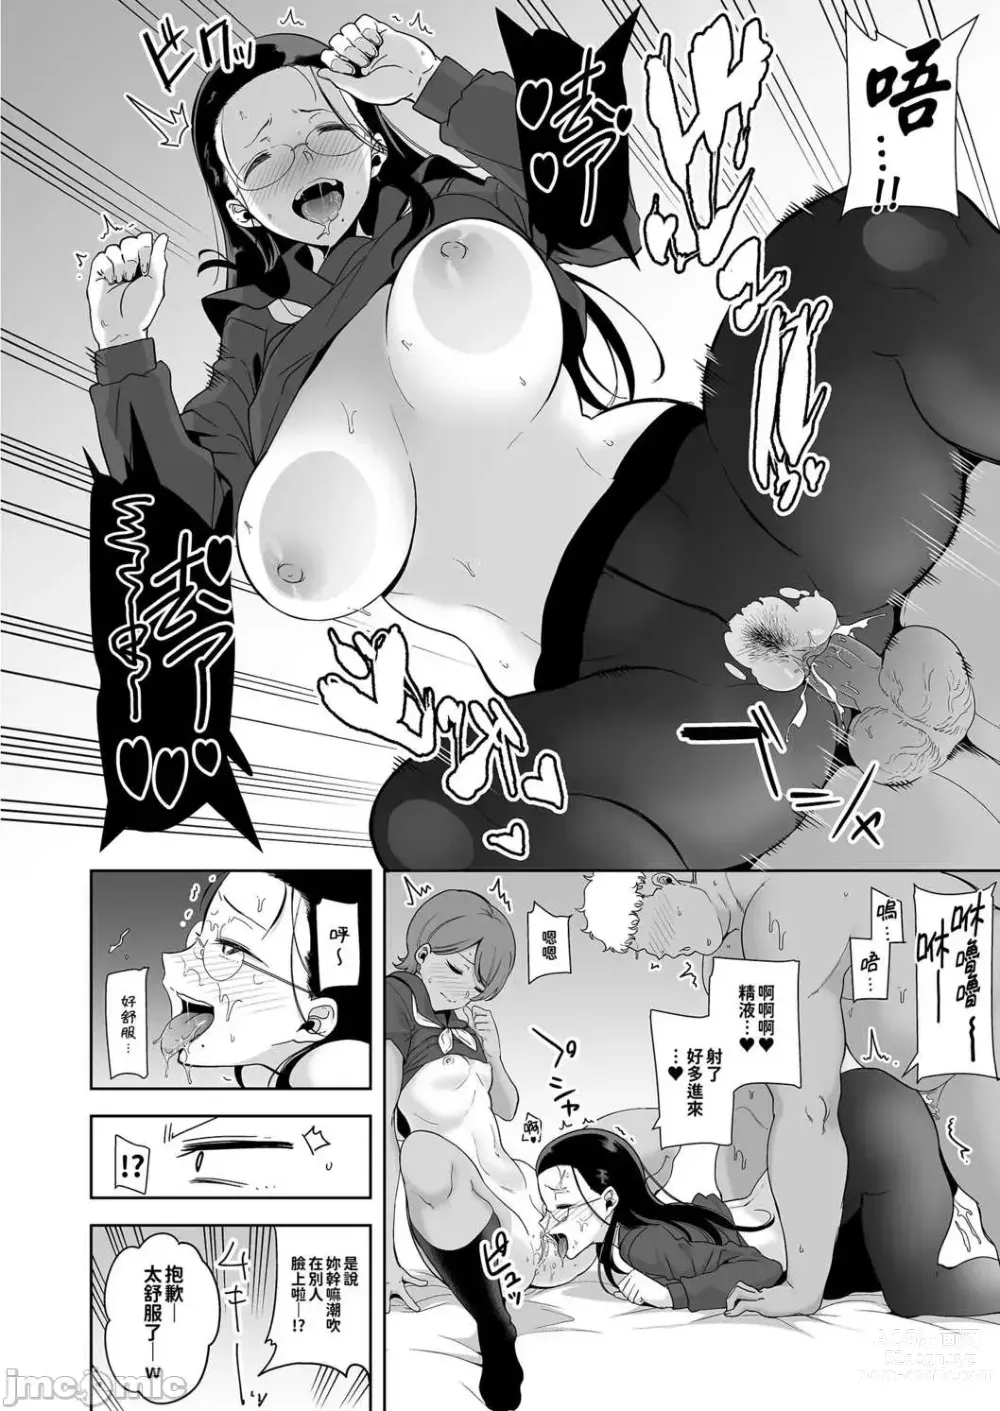 Page 86 of doujinshi Seika Girls Academys Officially Approved Prostitute Man 1 + 2 + 3